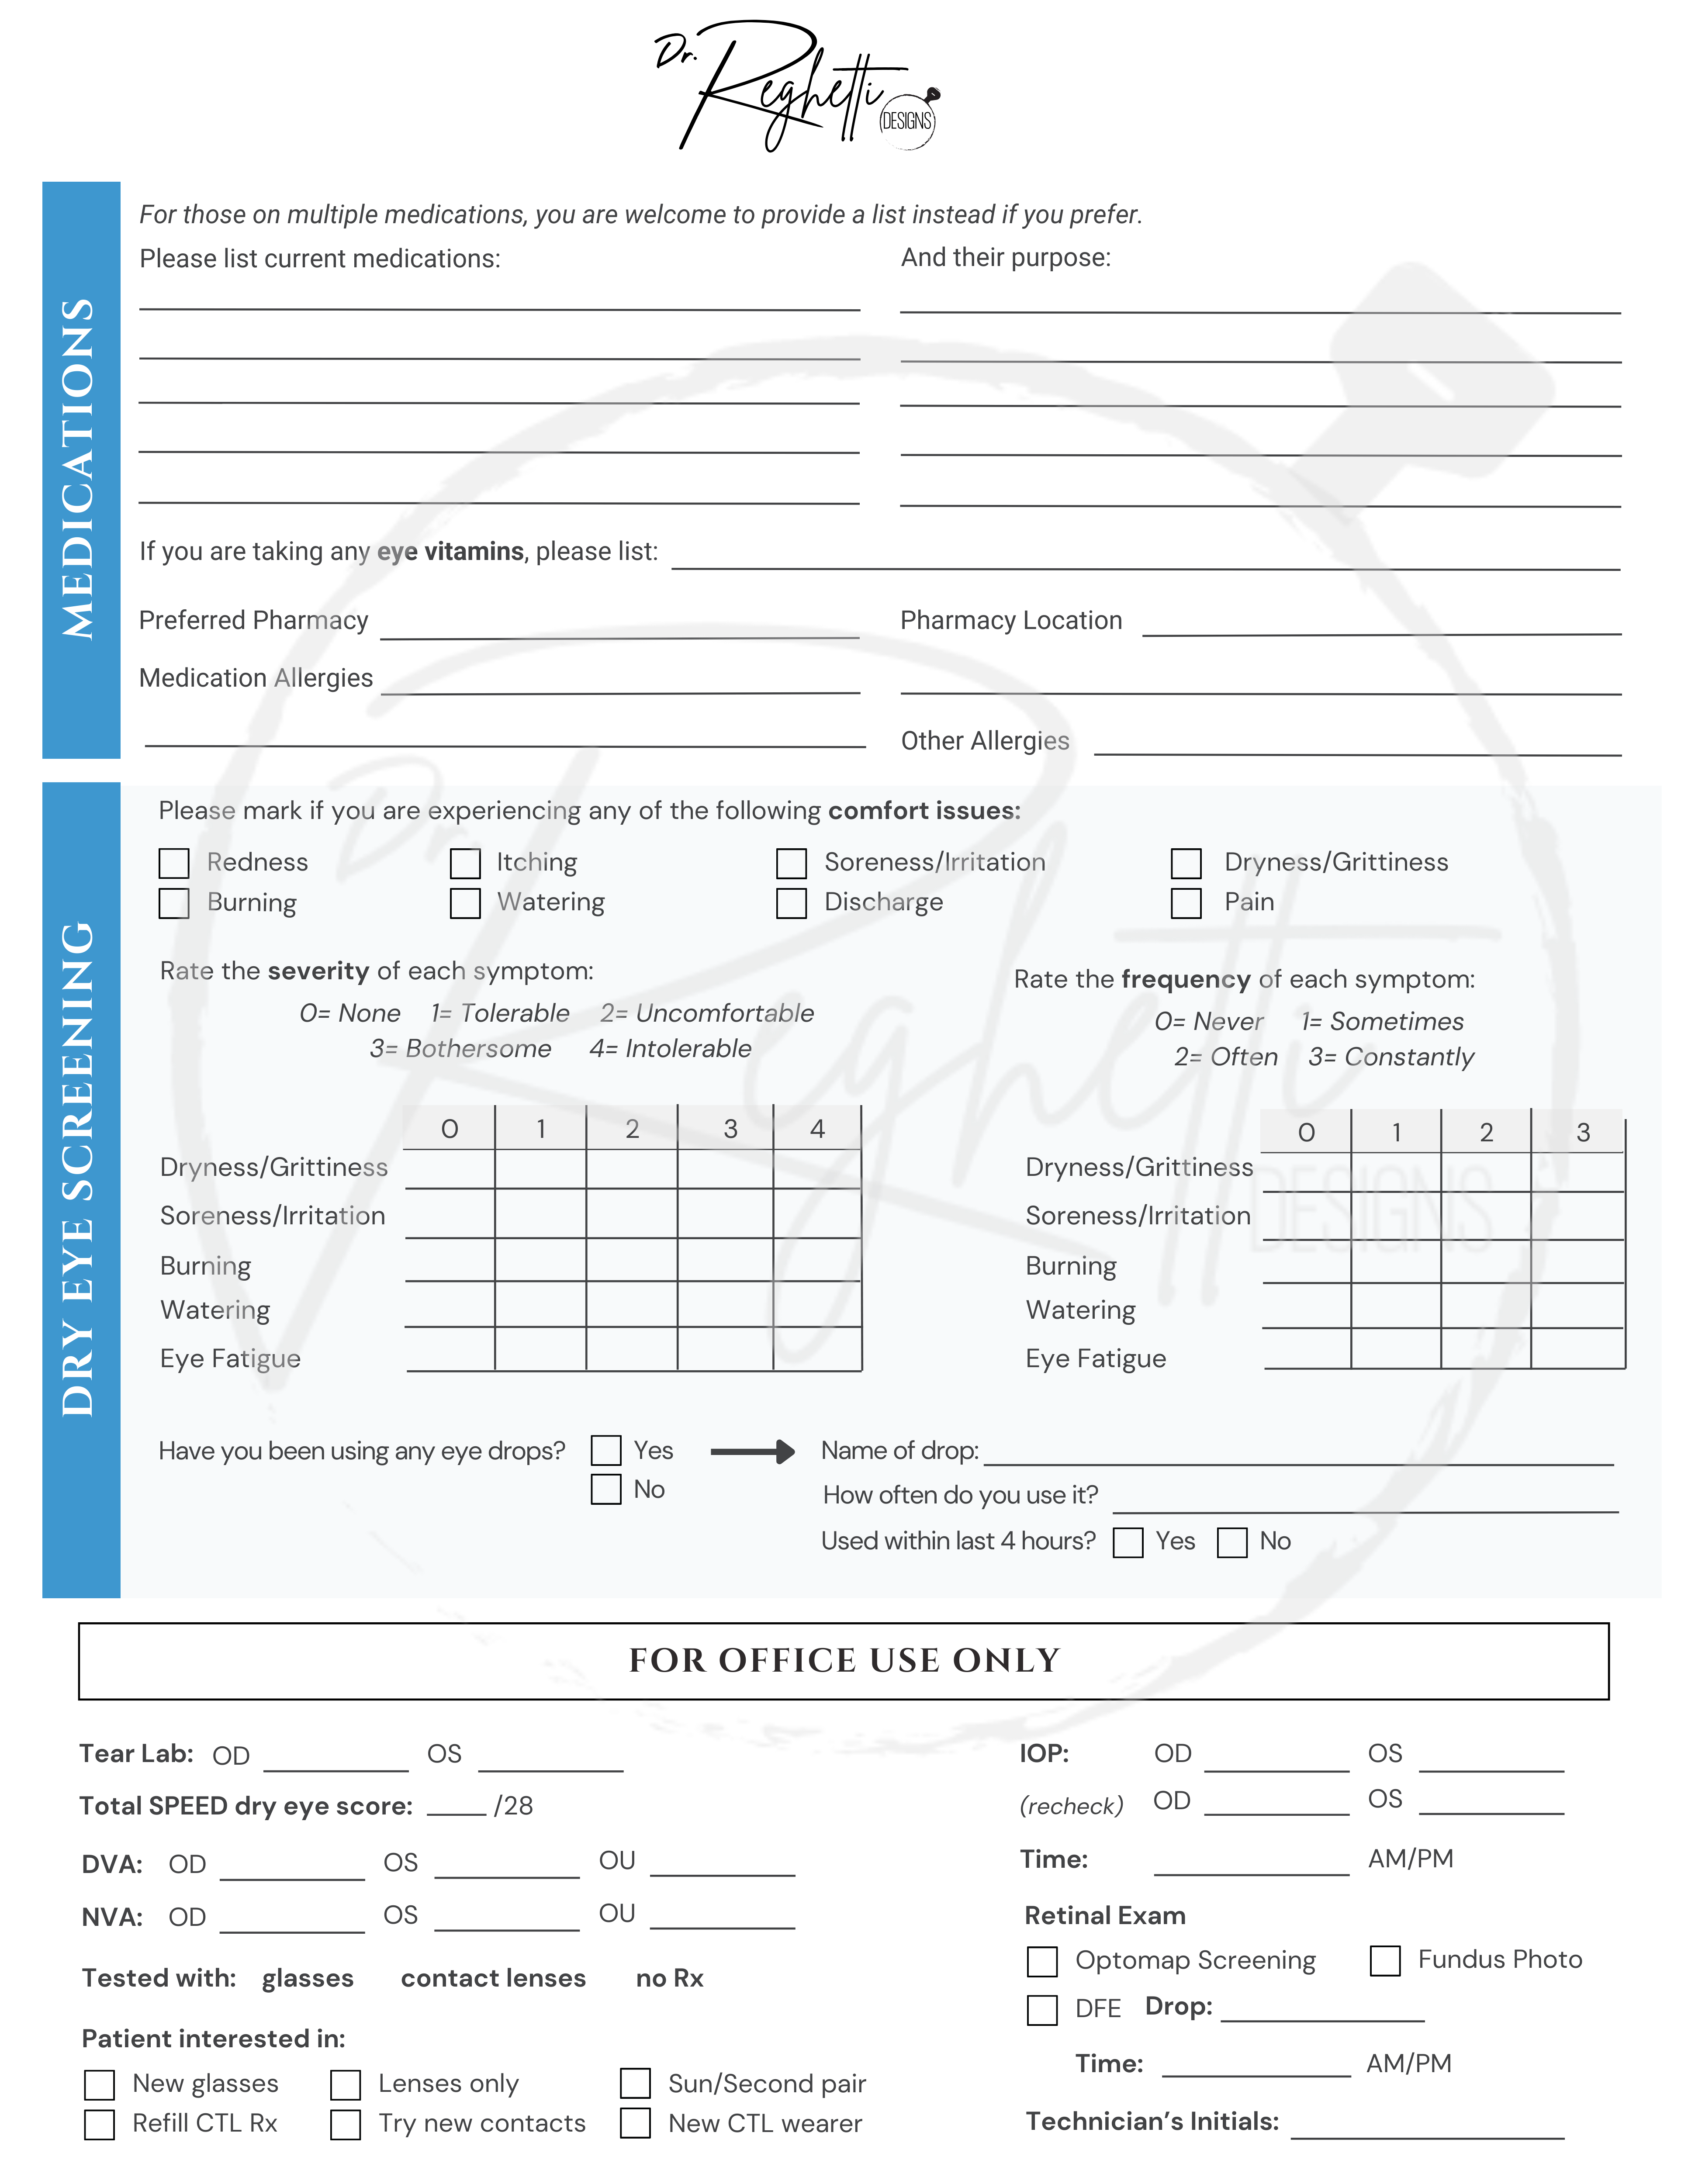 condensed intake form for optometry eye doctor health questionnaire with pretesting section 